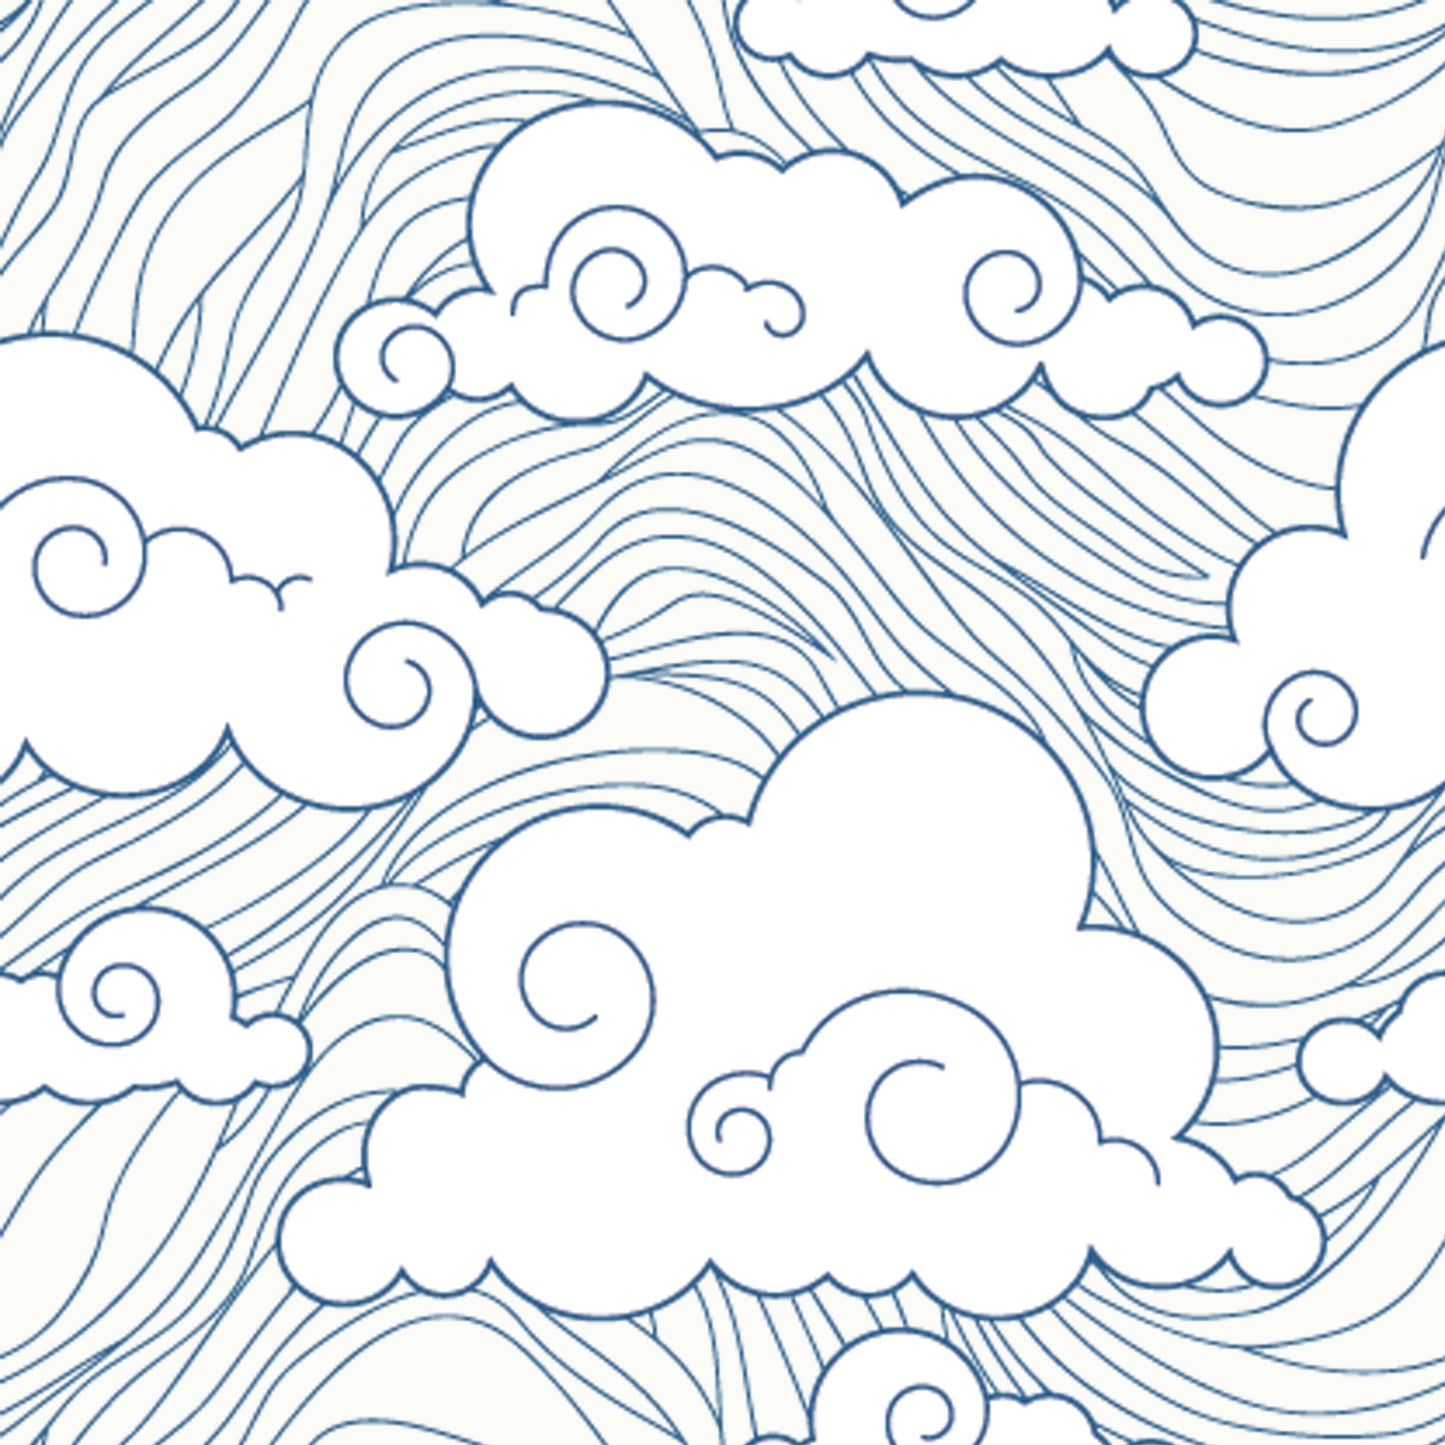 Daydreamer Cloud Removable Peel And Stick Wallpaper